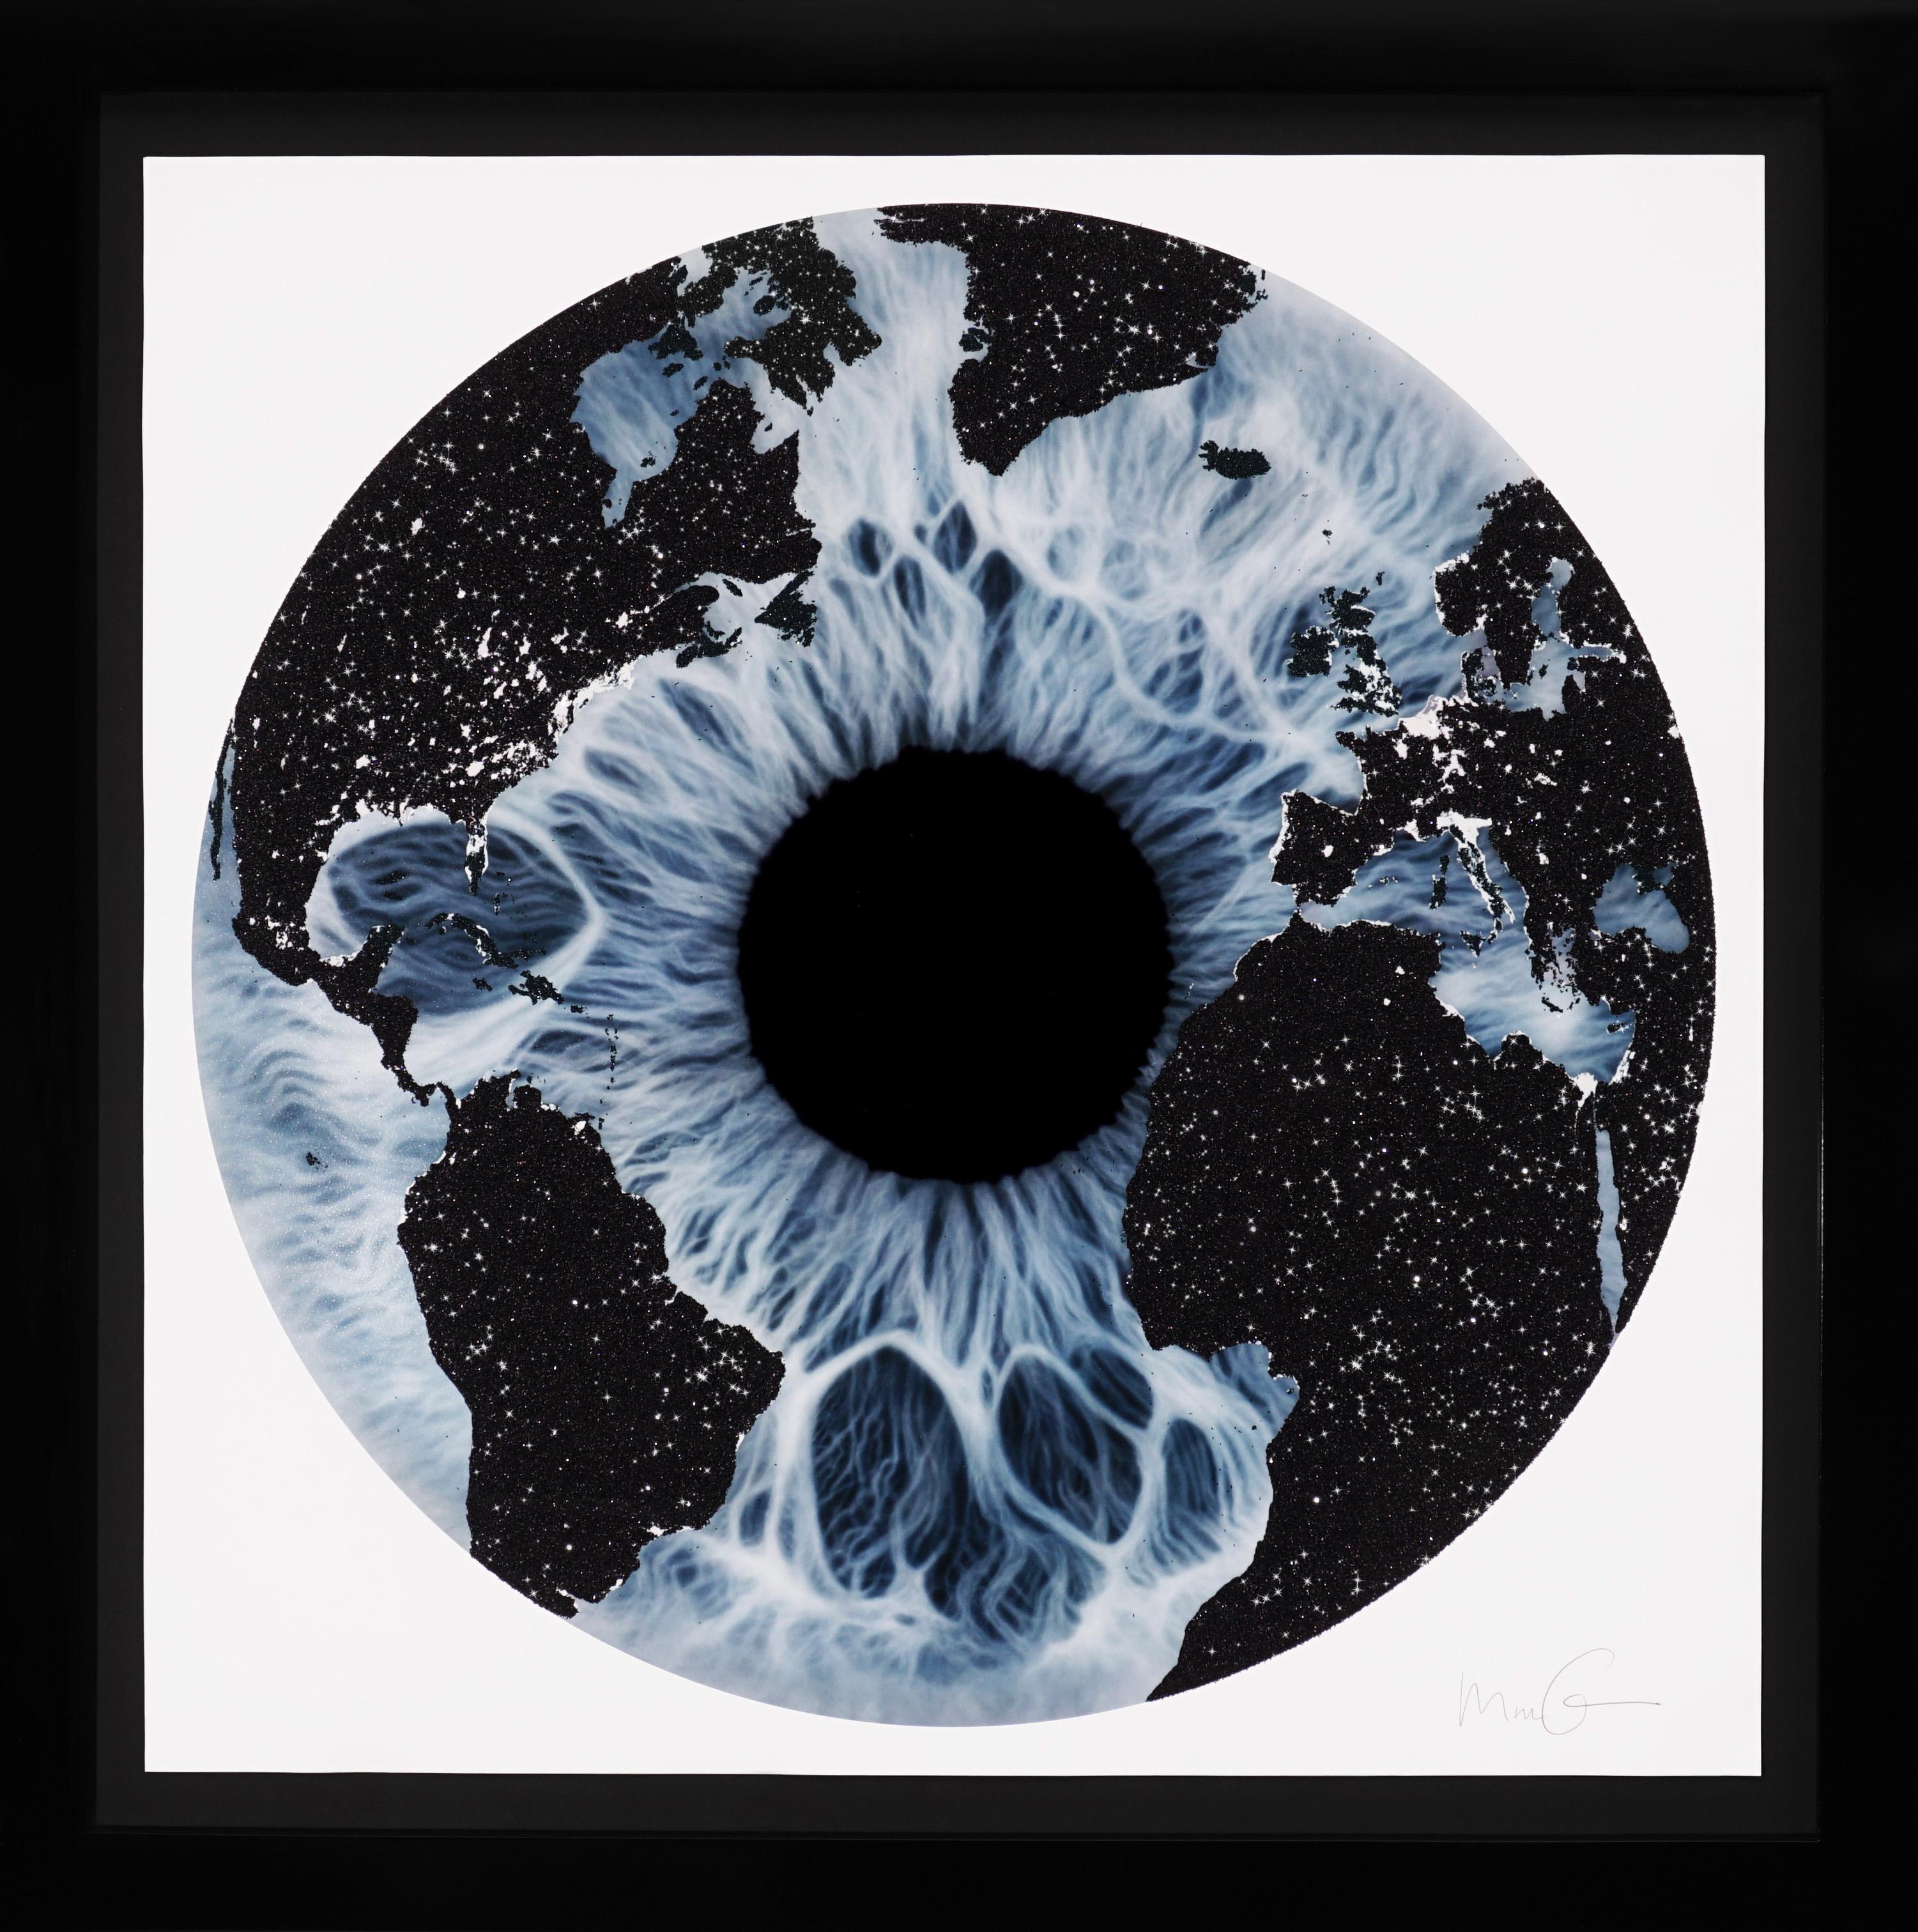 The 'Iris' in icy blue and black is a silkscreen print with Diamond Dust on paper created in 2019 by Marc Quinn. The piece features a mystical blue iris with a glittering black diamond dust overlay in the shape of the earth's geography. This signed